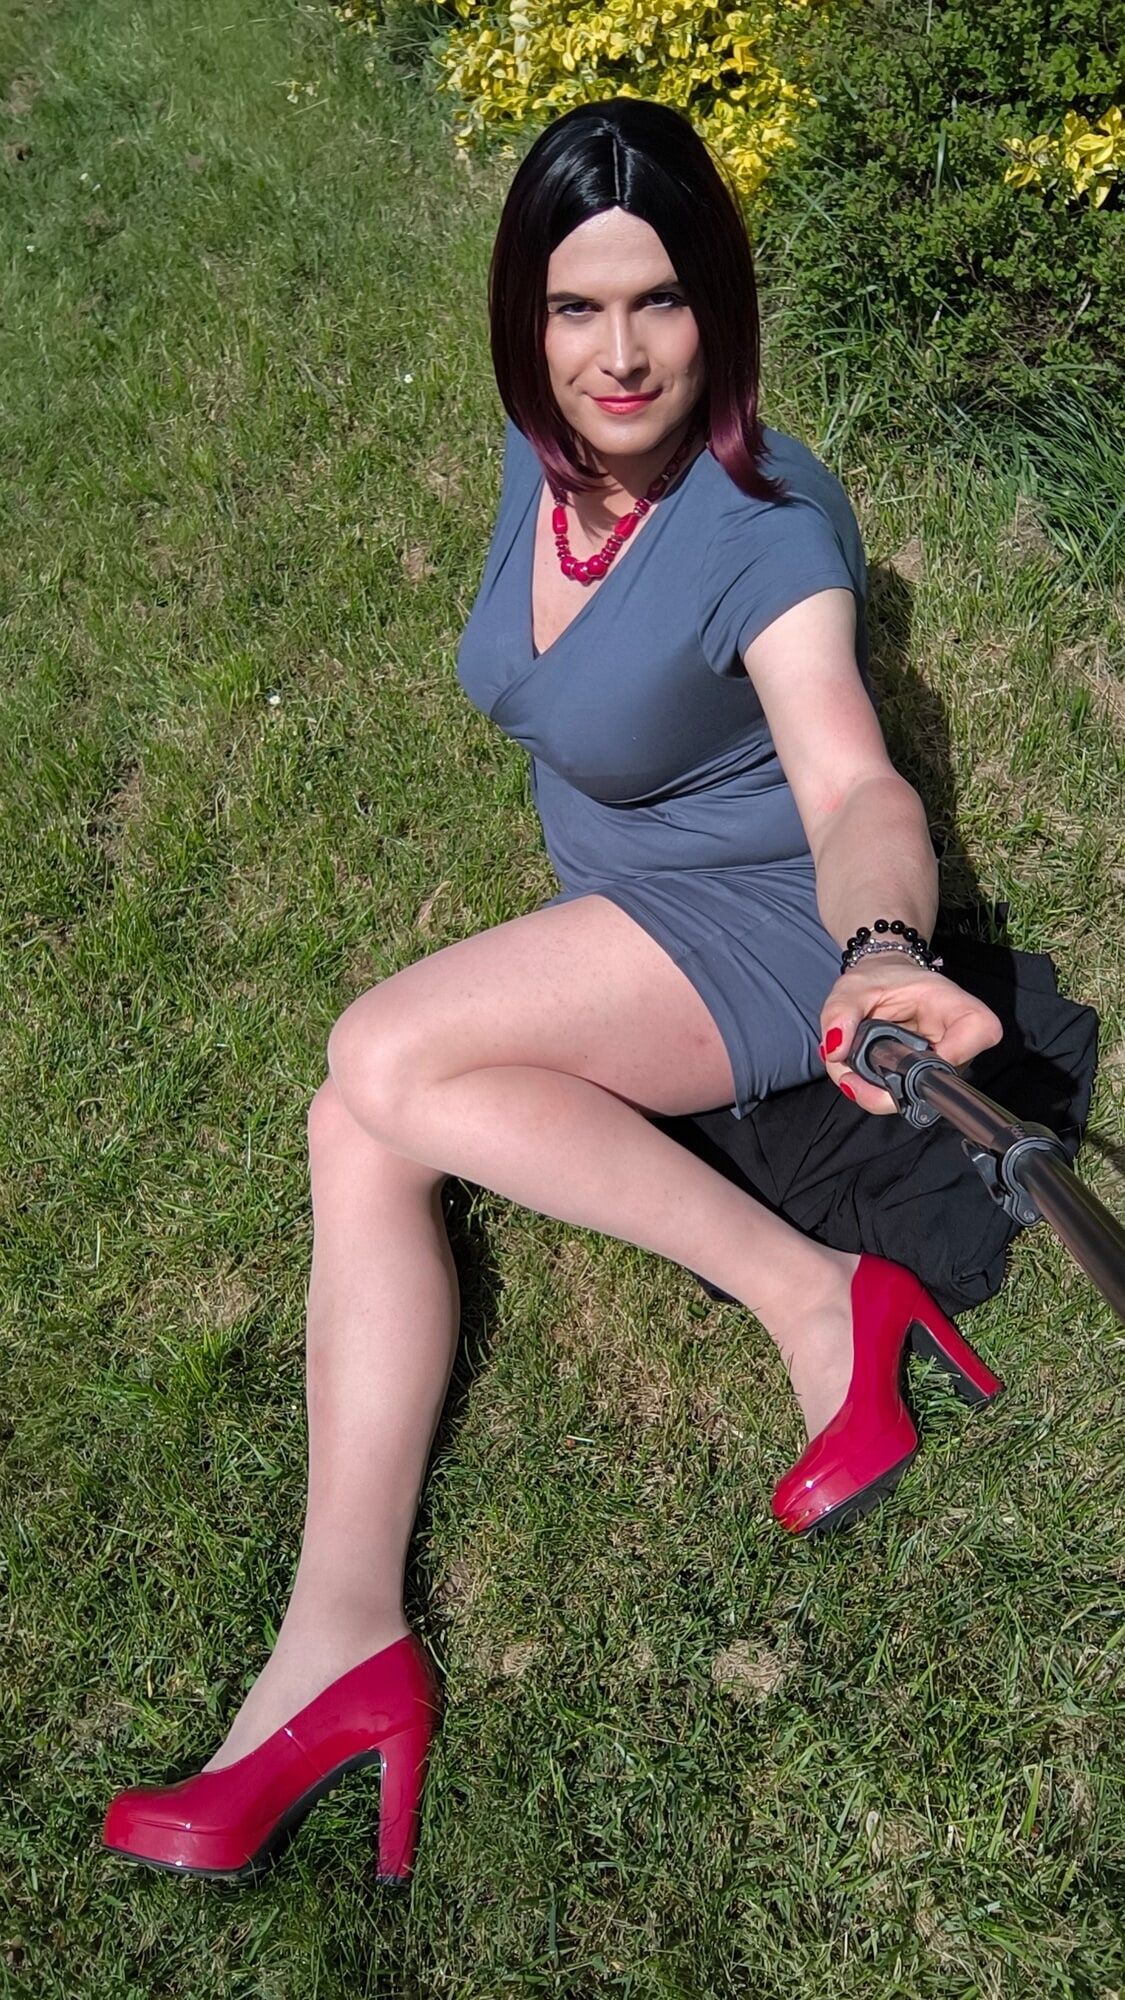 Blue dress and red pumps